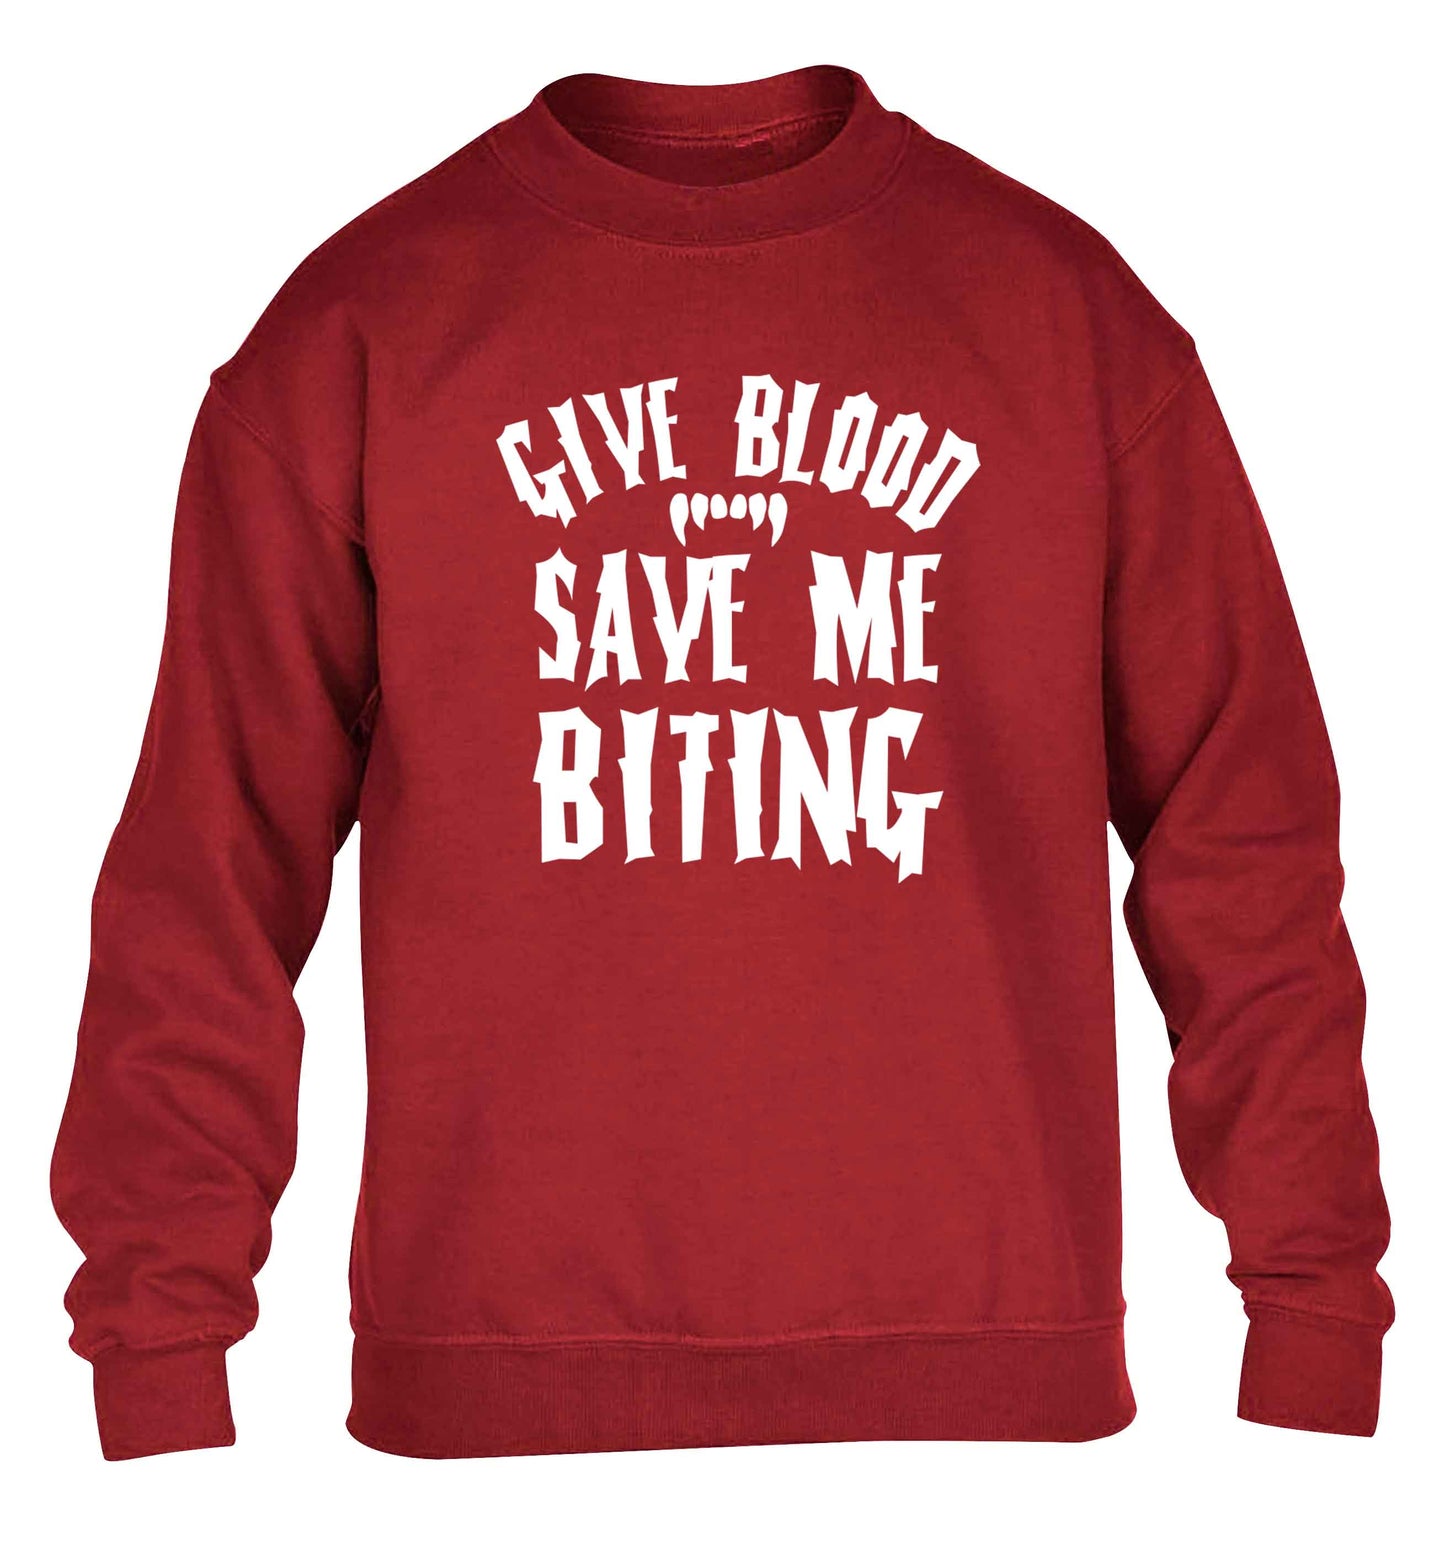 Give blood save me biting children's grey sweater 12-13 Years